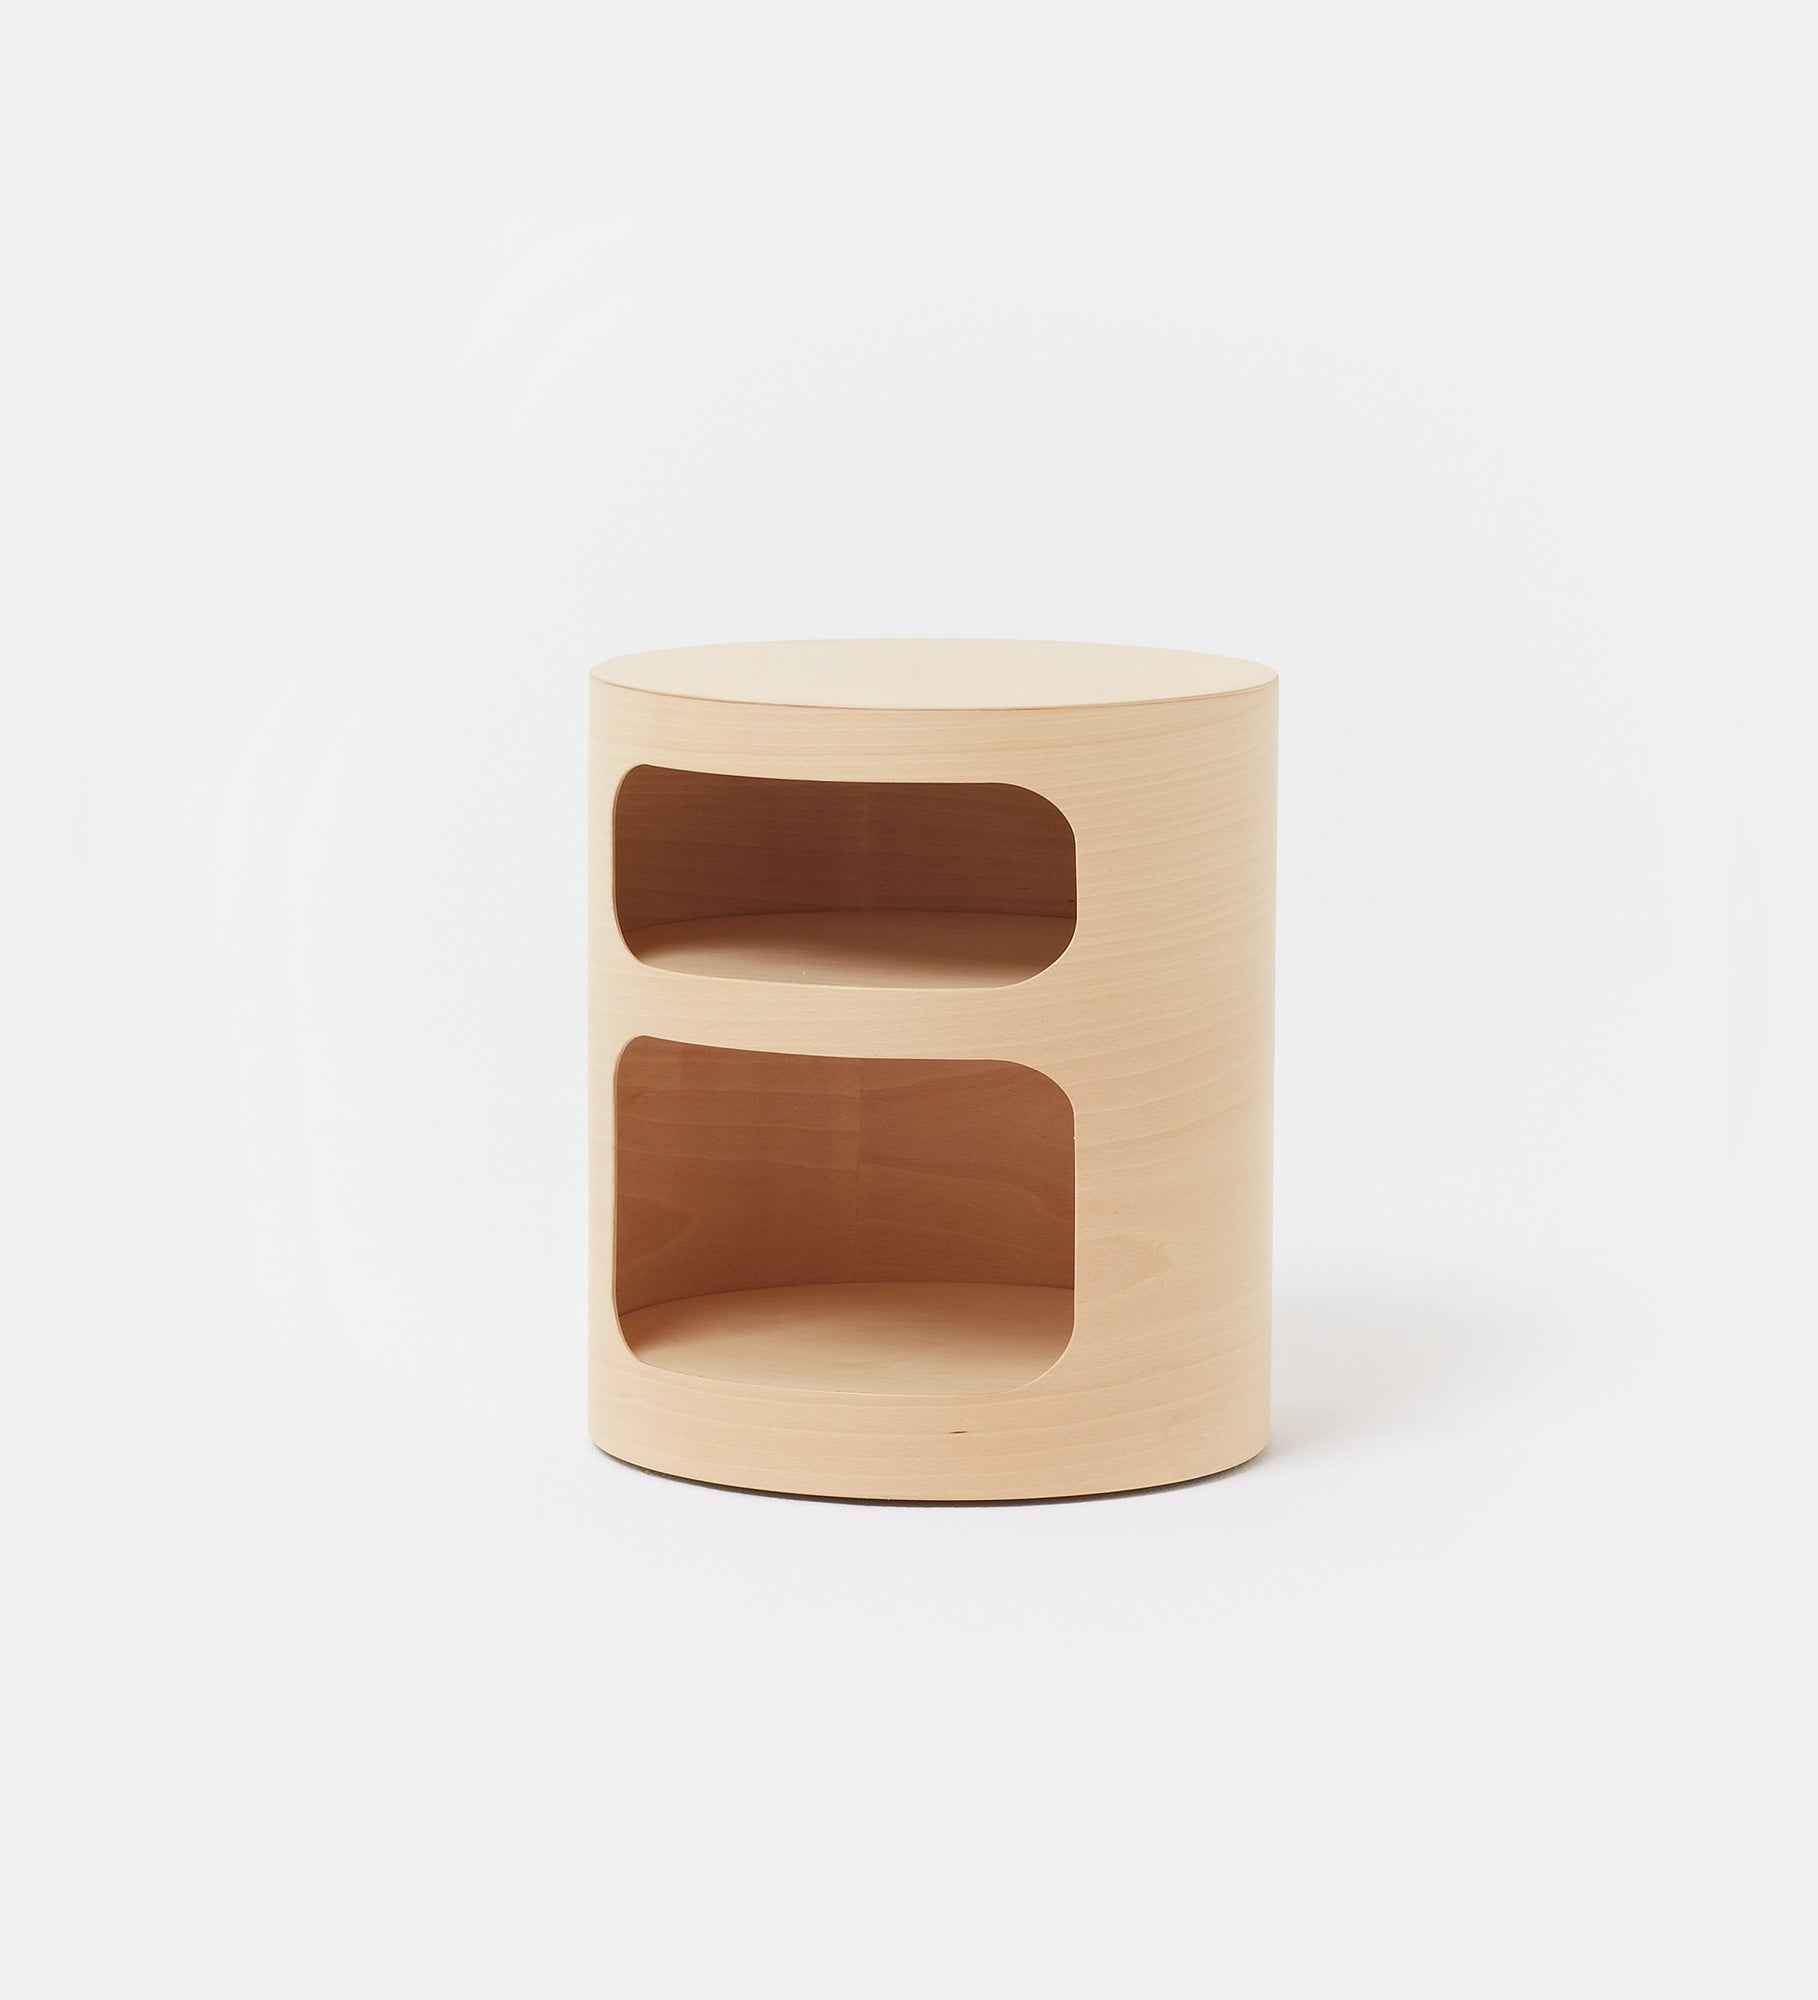 Minimalist Furniture by Plyroom designed and made by furniture makers in Melbourne